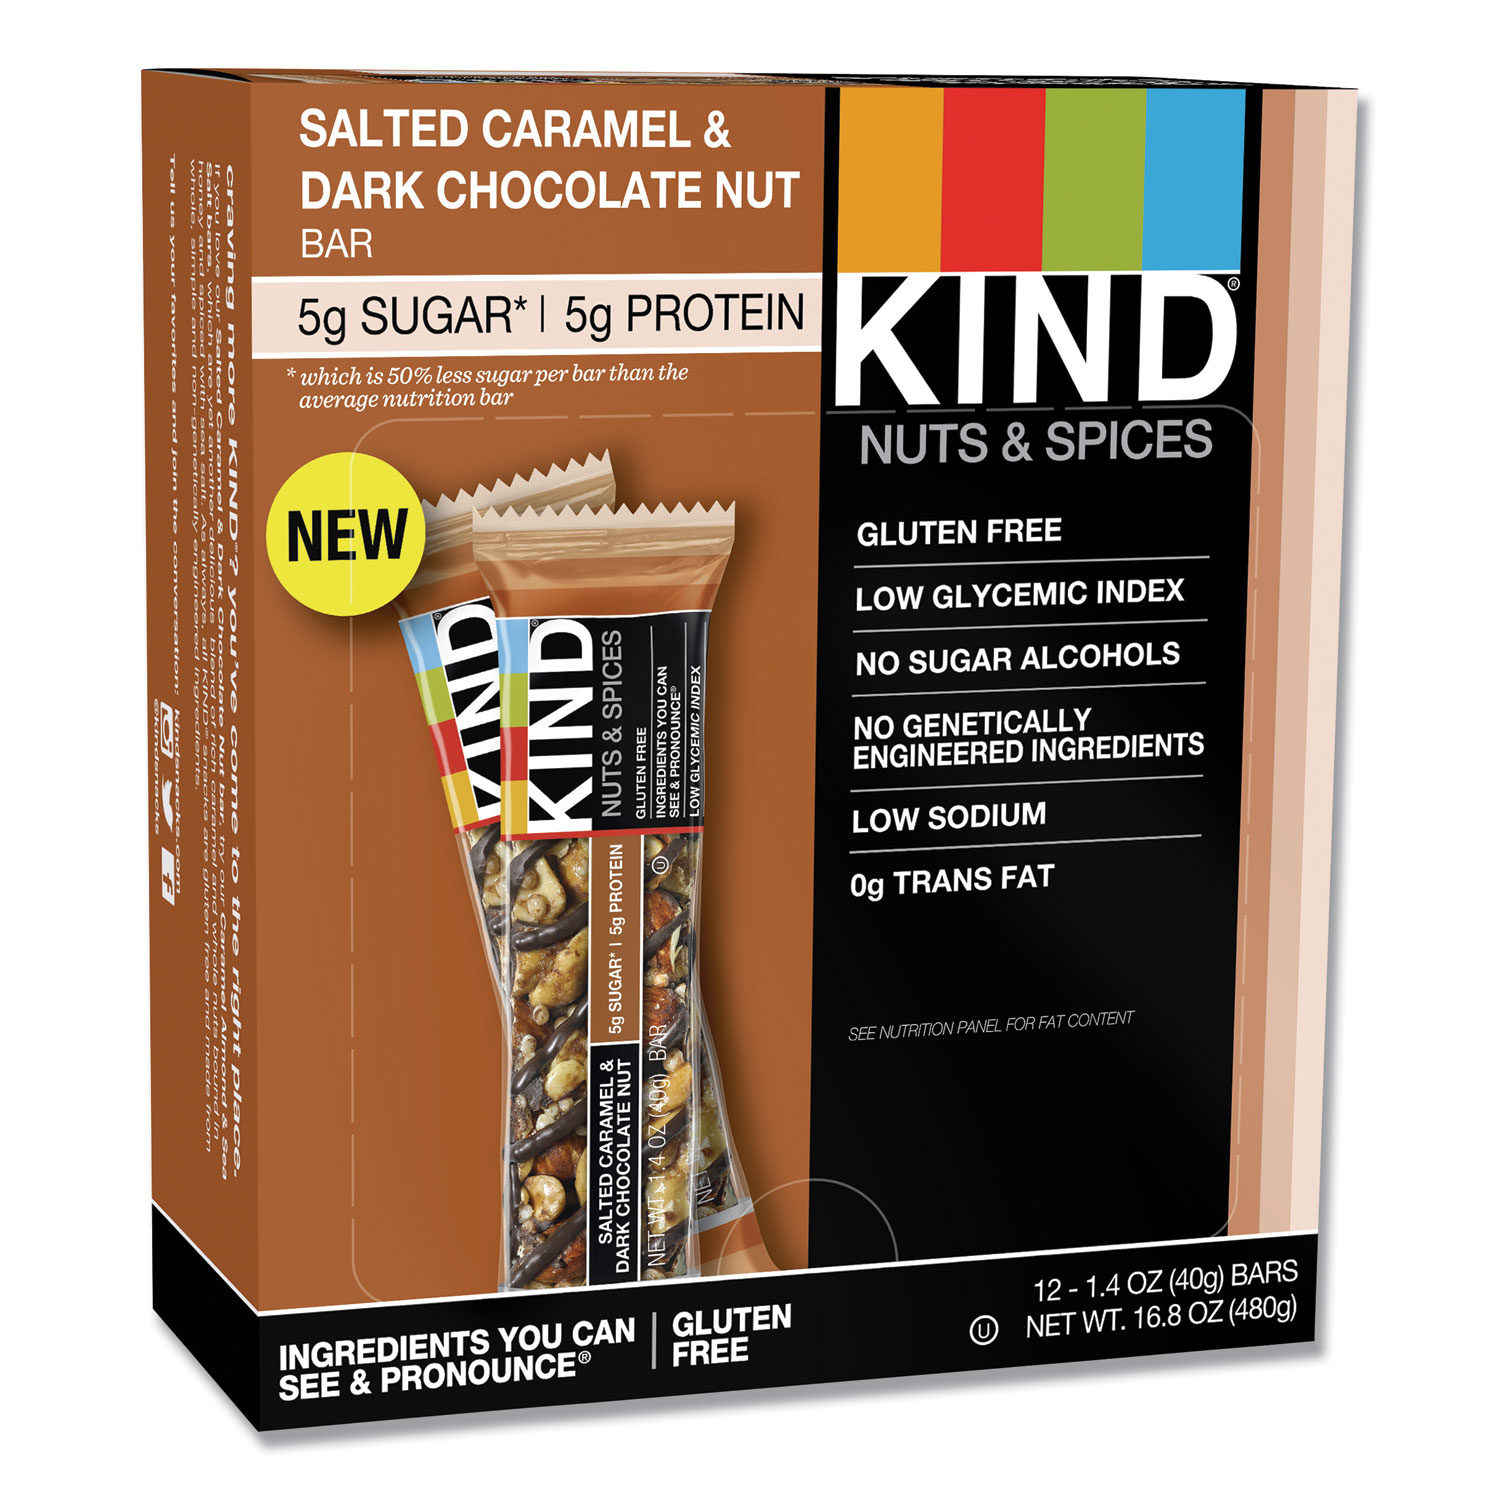  KIND 26961 Nuts and Spices Bar, Salted Caramel and Dark Chocolate Nut, 1.4 oz, 12/Pack (KND26961) 